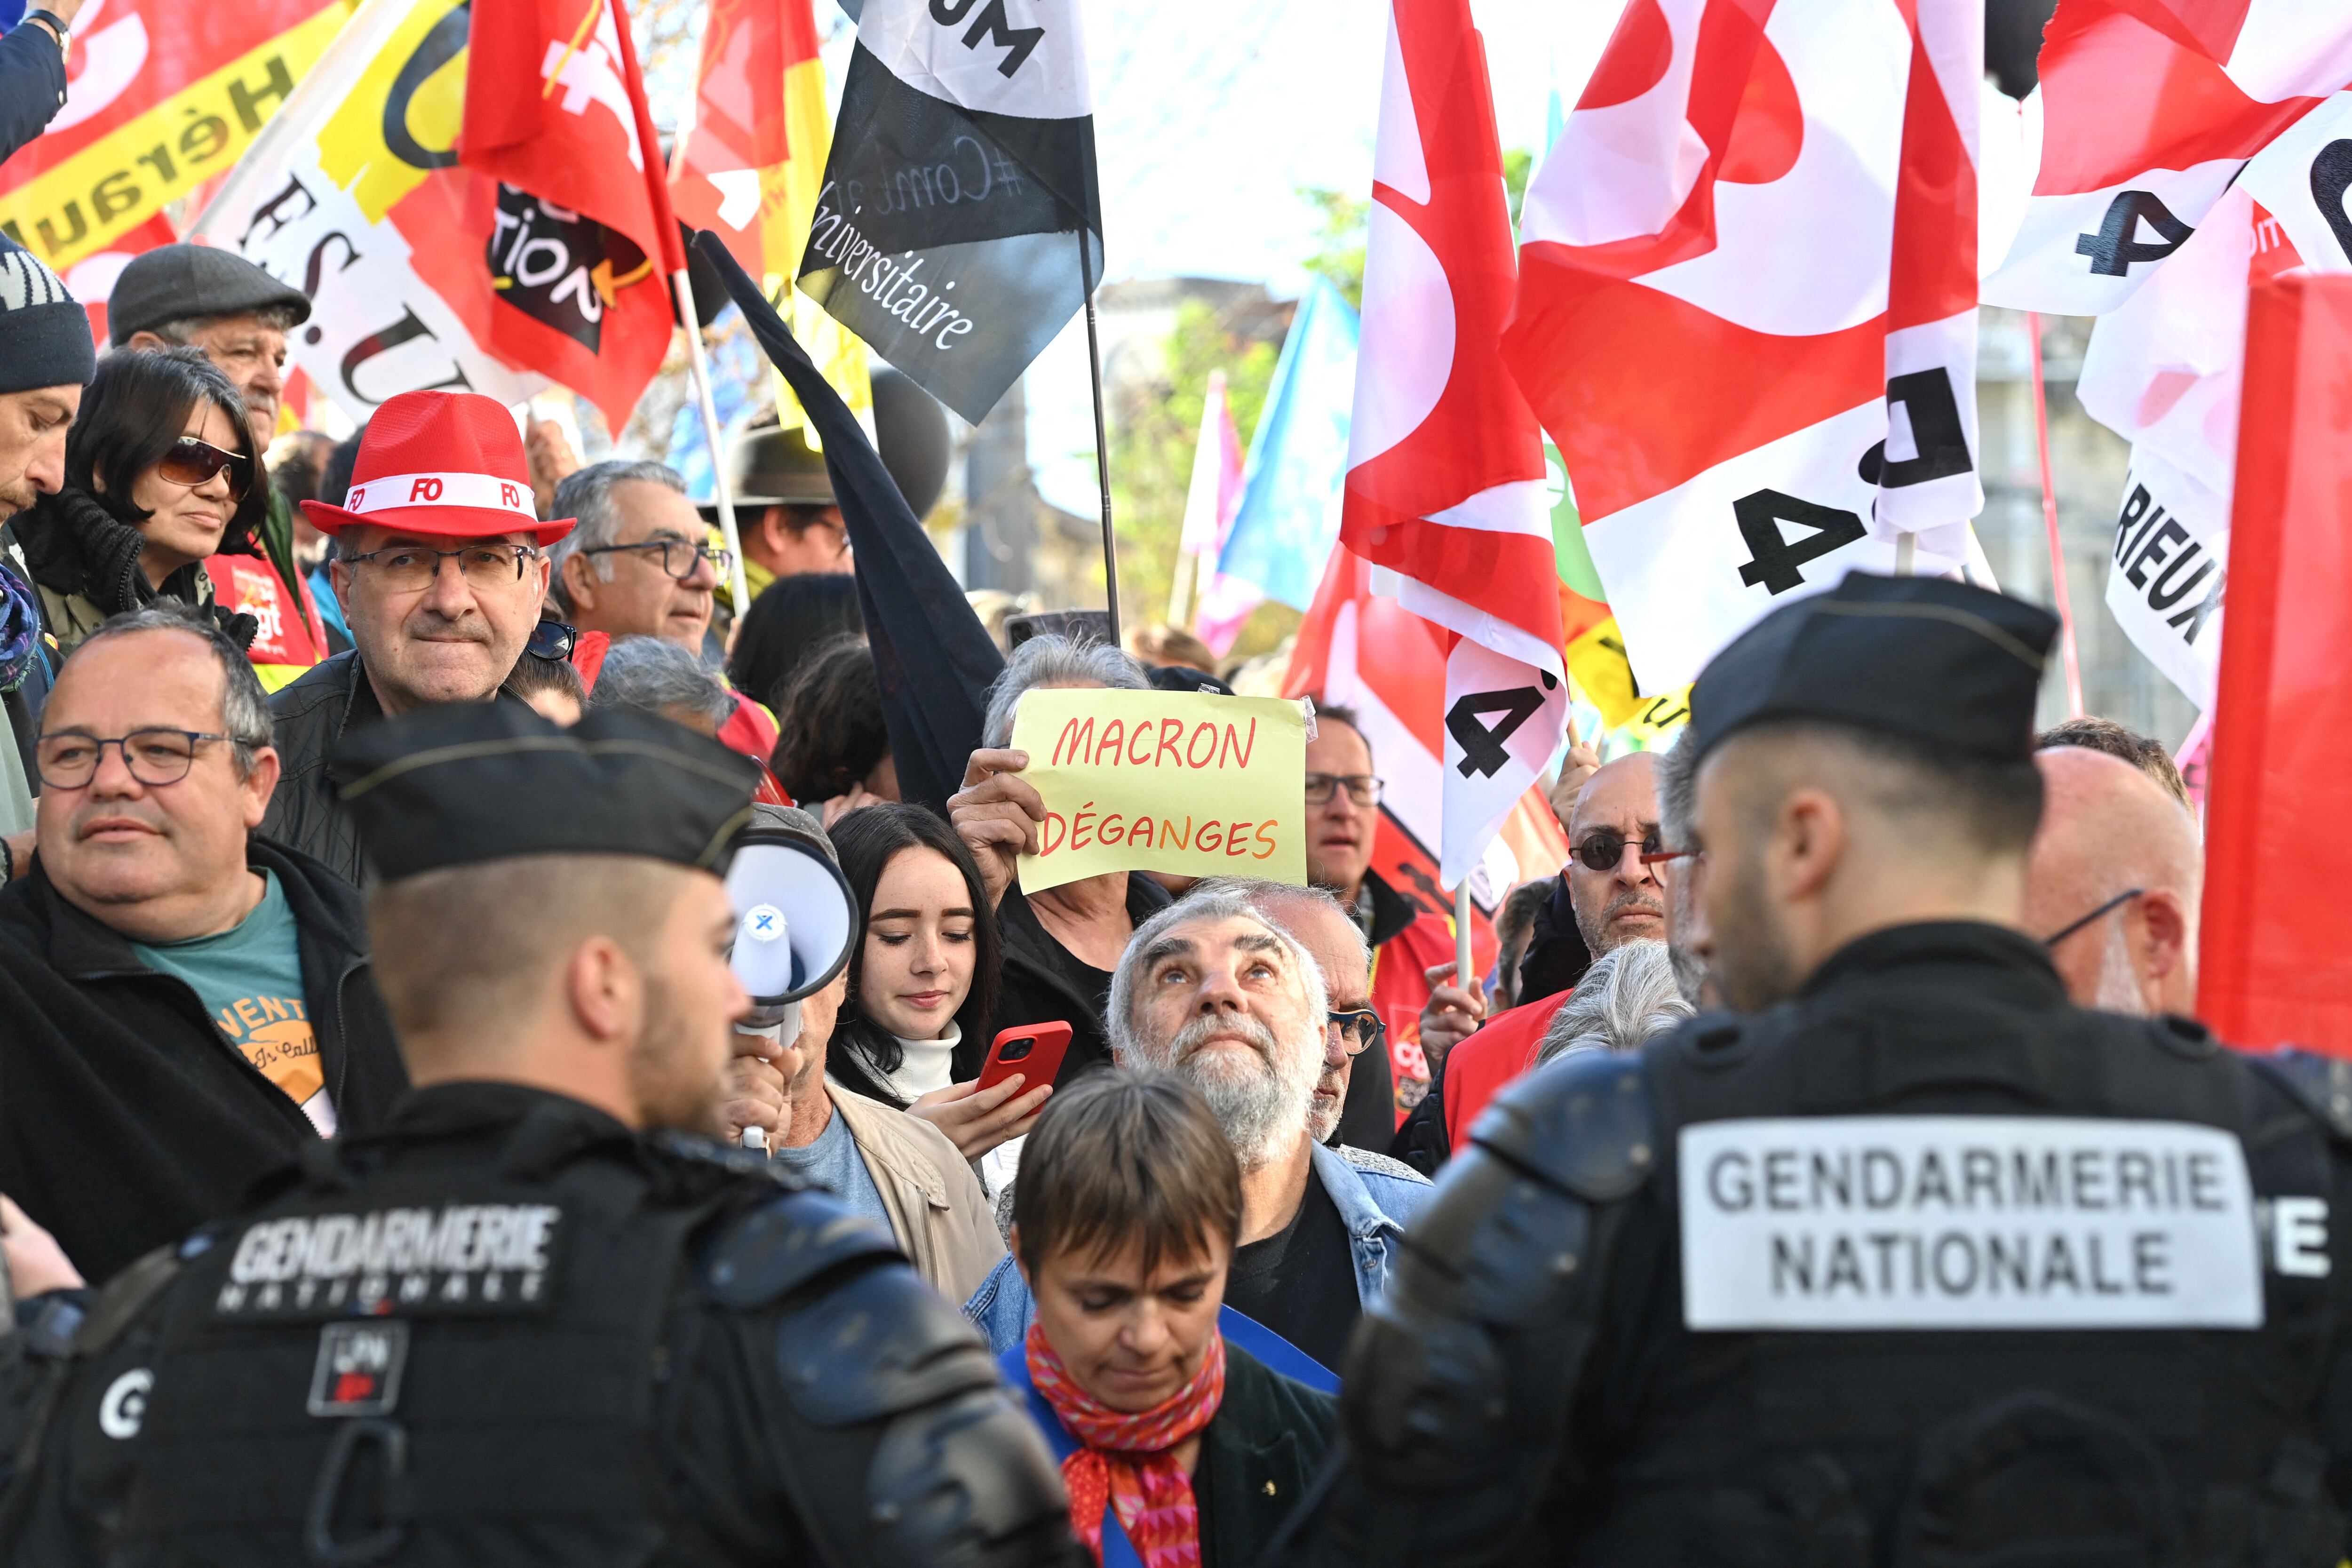 A May 1 protest in France against pension reform